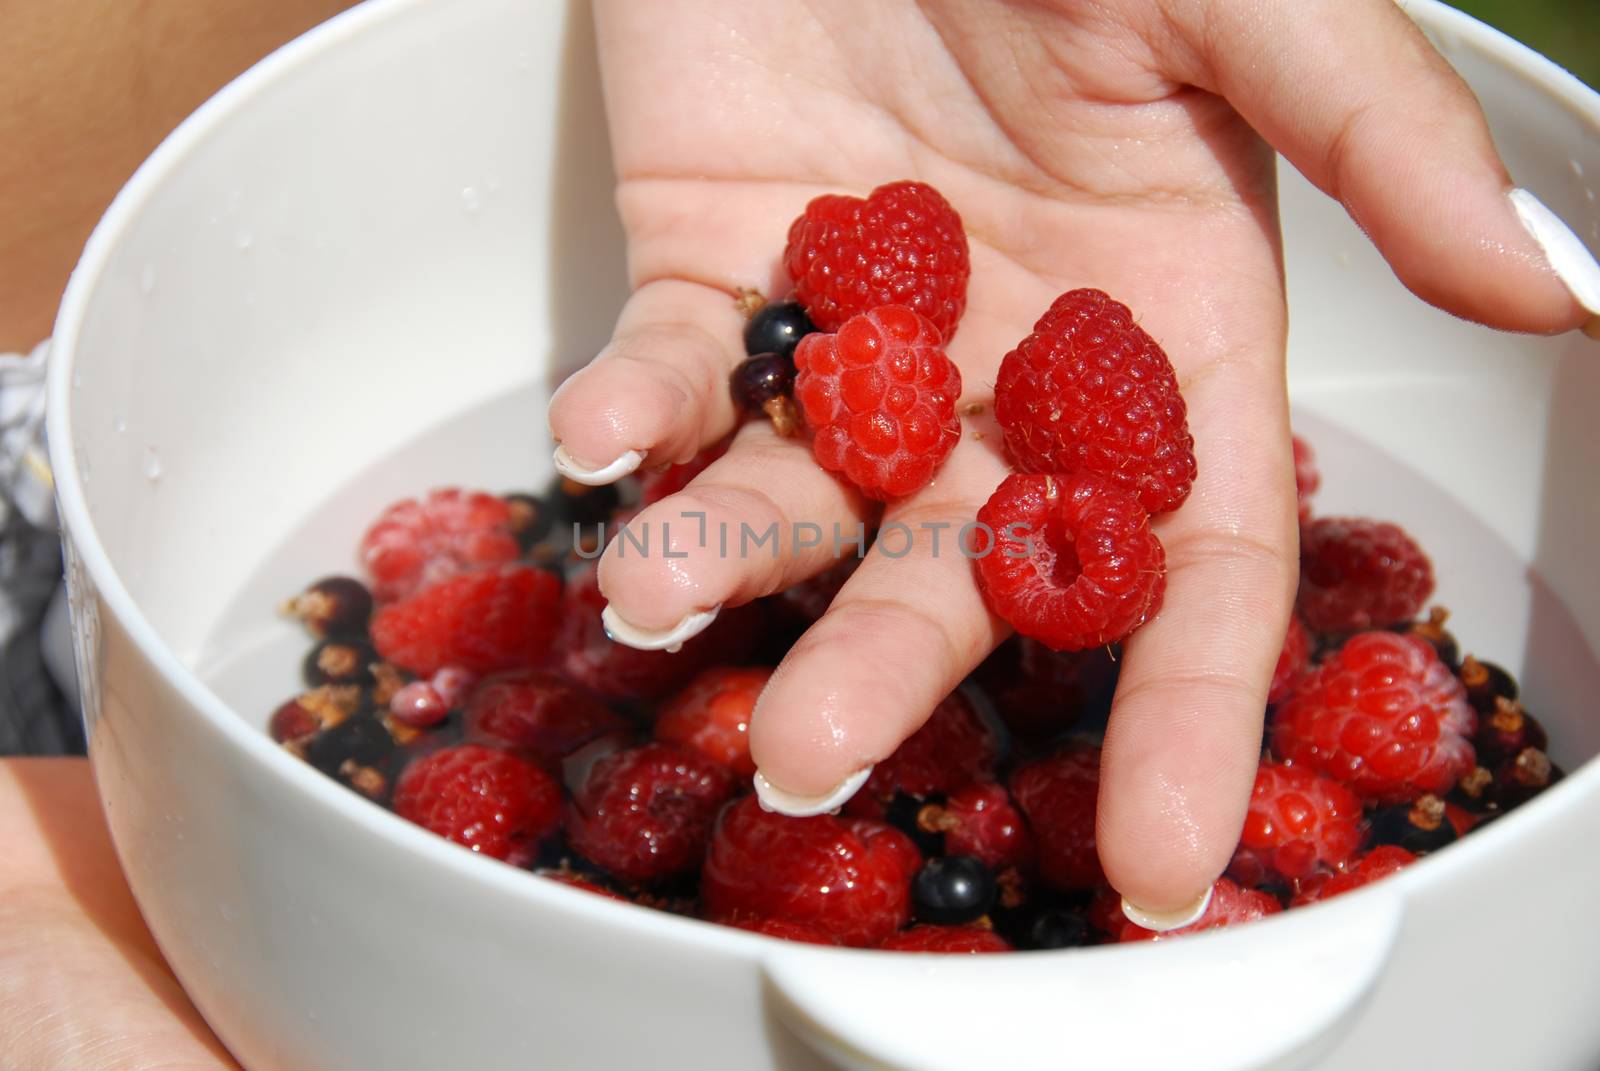 Holding raspberries in the hand by simply